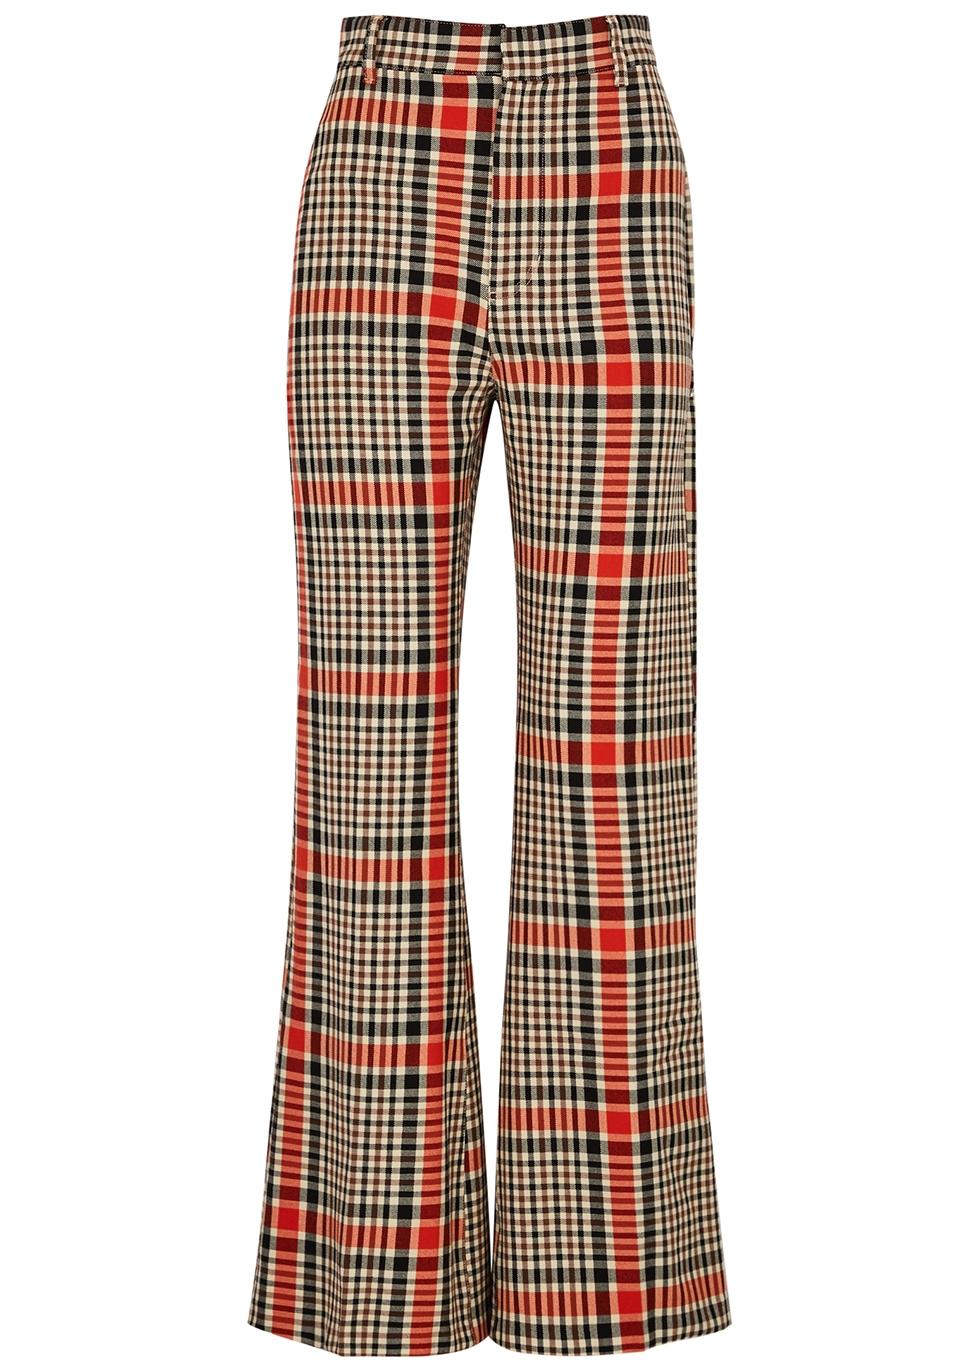 Free People Jules Plaid Flared Trousers | Lyst